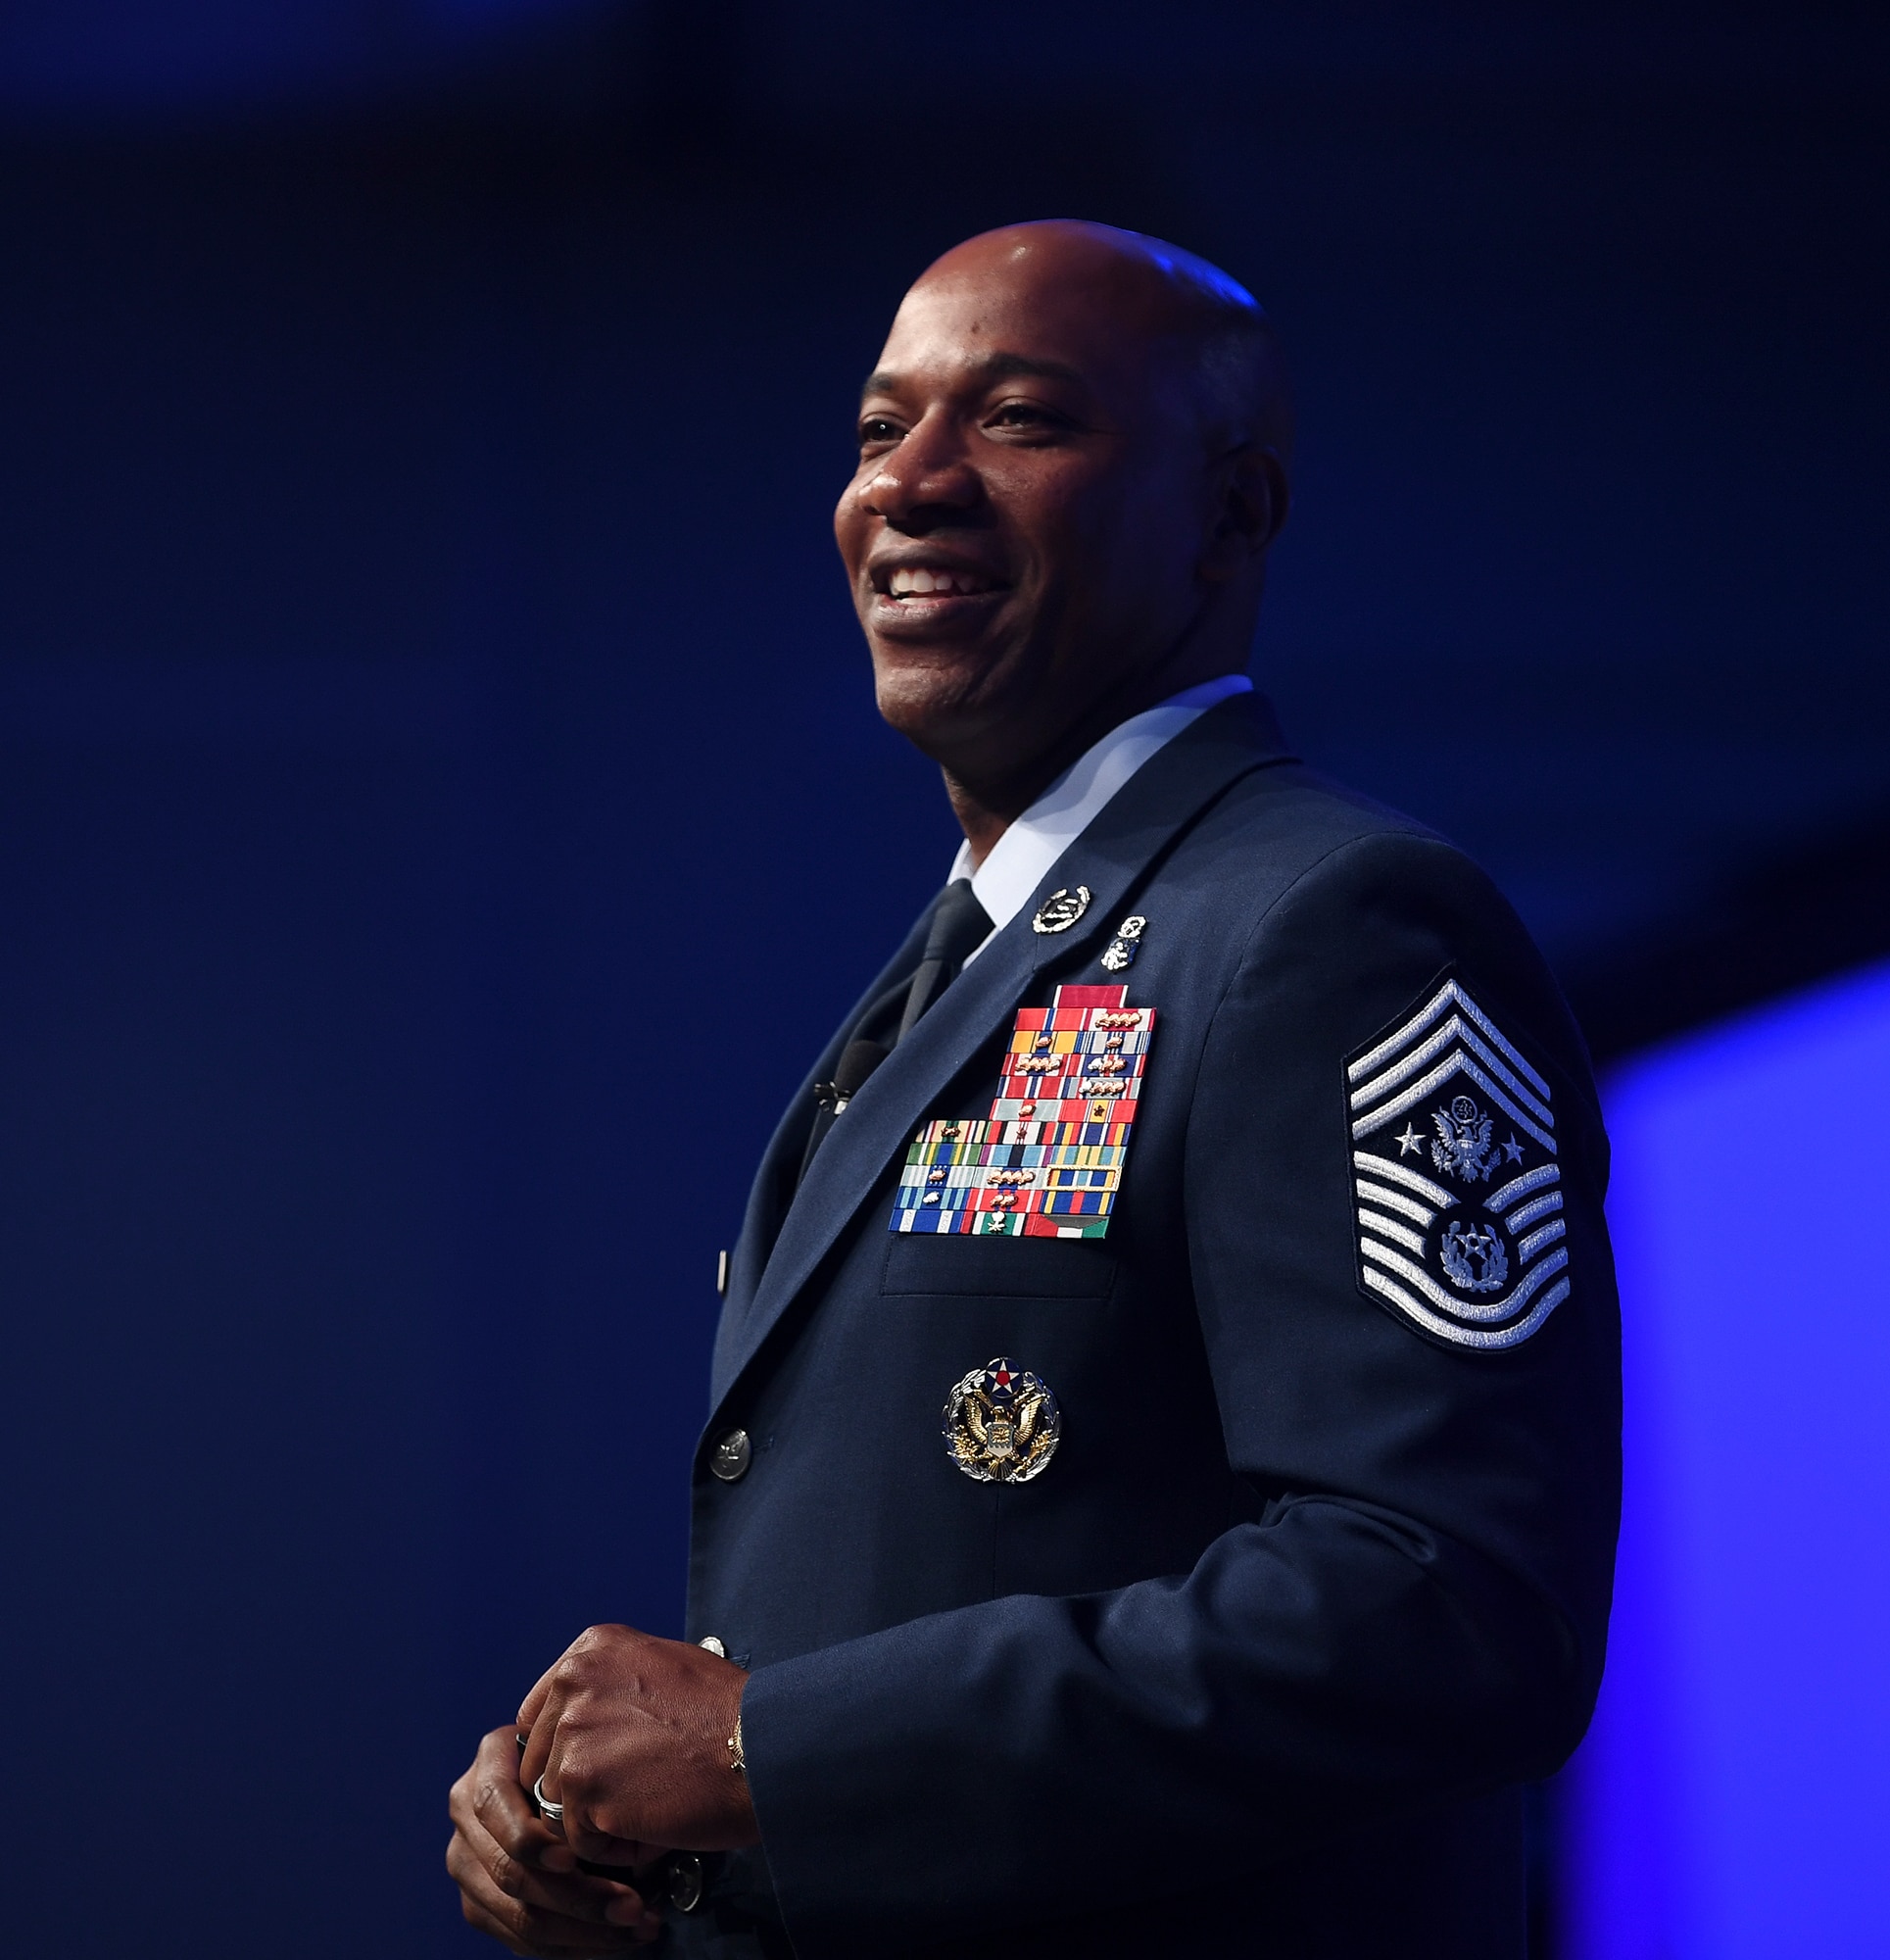 Chief Master Sgt. of the Air Force Kaleth O. Wright delivers a speech on leading with purpose during the Air Force Association’s Air, Space and Cyber Conference in National Harbor, Md., Sept. 18, 2019. The ASC Conference is a professional development seminar that offers the opportunity for Department of Defense personnel to participate in forums, speeches and workshops. This annual event features engaging speakers and panels focused on airpower, space and cyber developments and a technology exposition featuring the latest technology, equipment and solutions for tomorrow’s problems. The ASC has something for everyone. (U.S. Air Force photo by Andy Morataya)